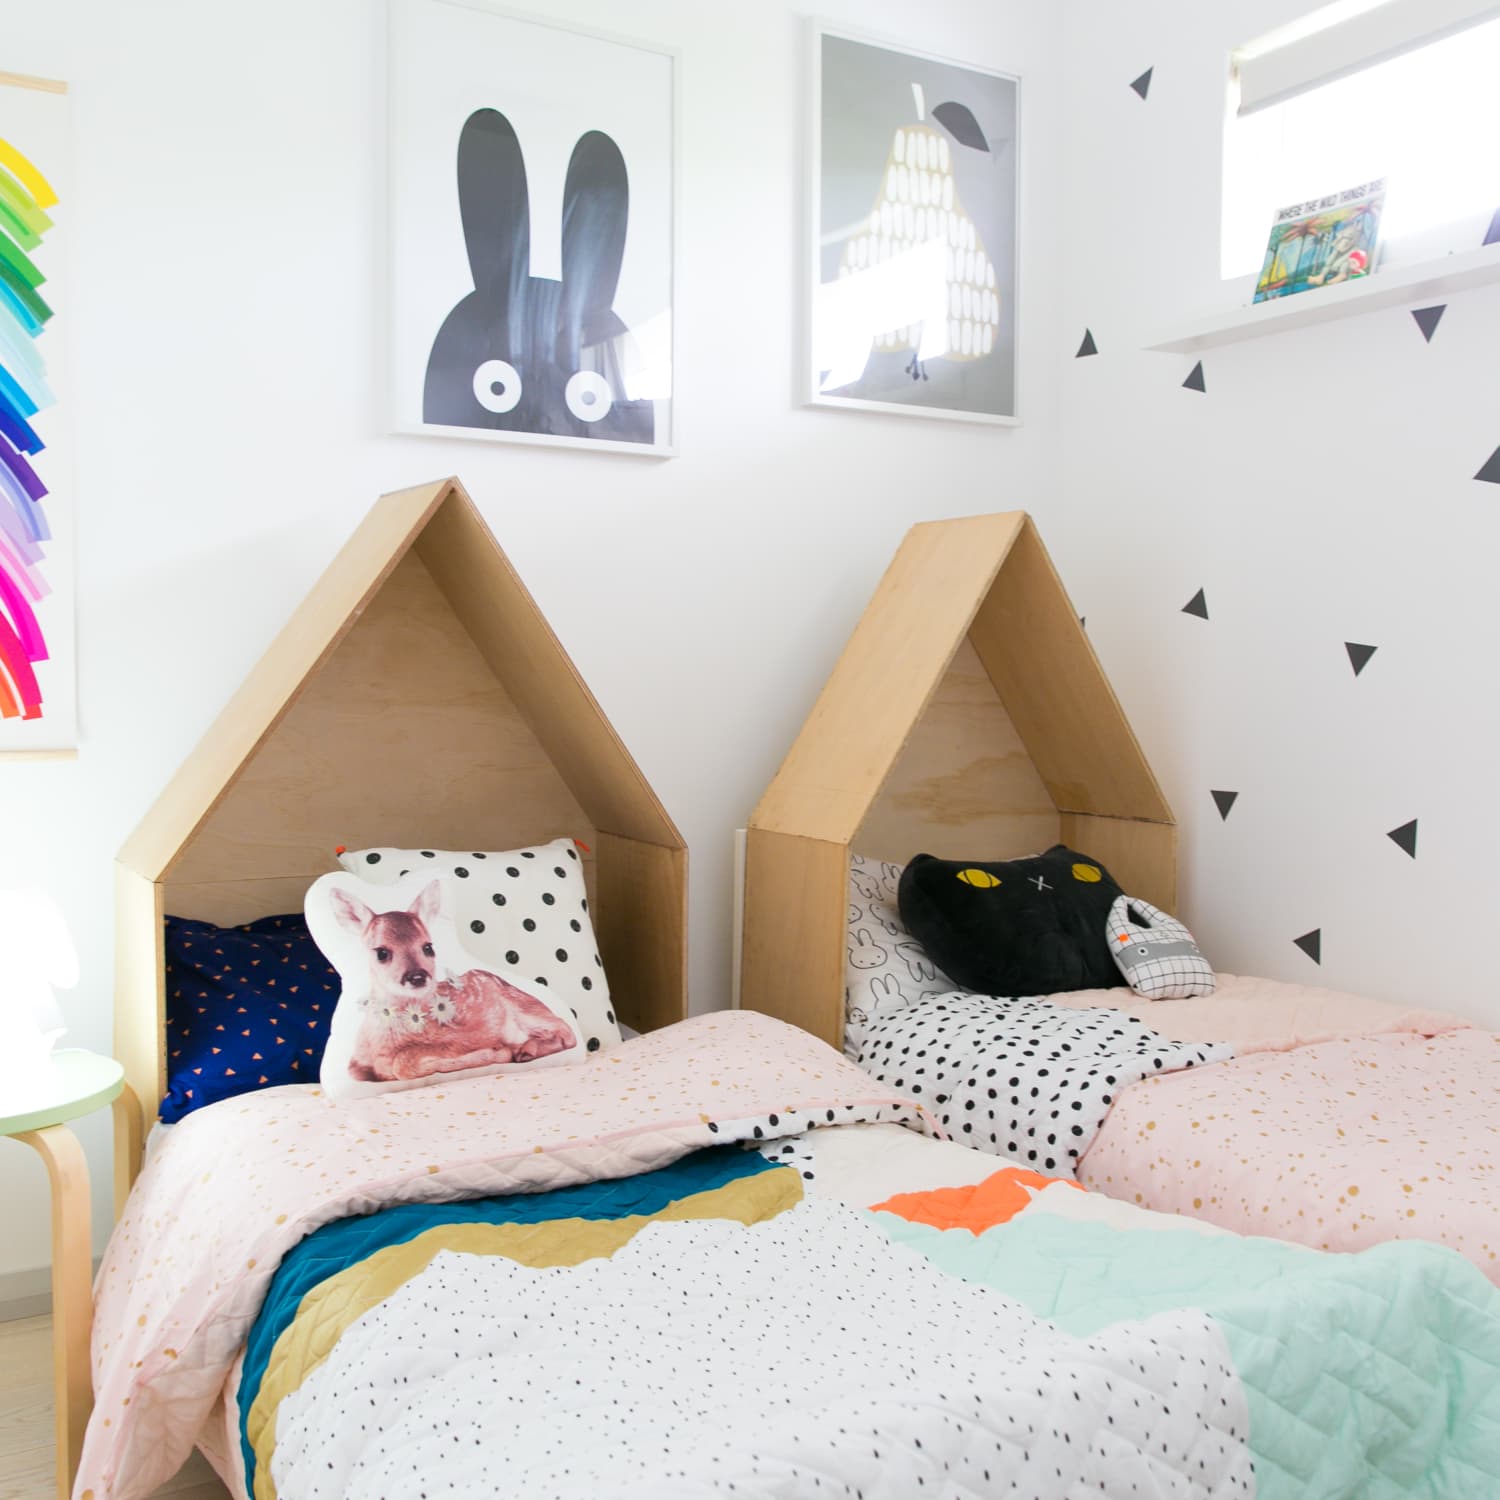 20 Kids' Bedroom Ideas the Whole Family Will Love